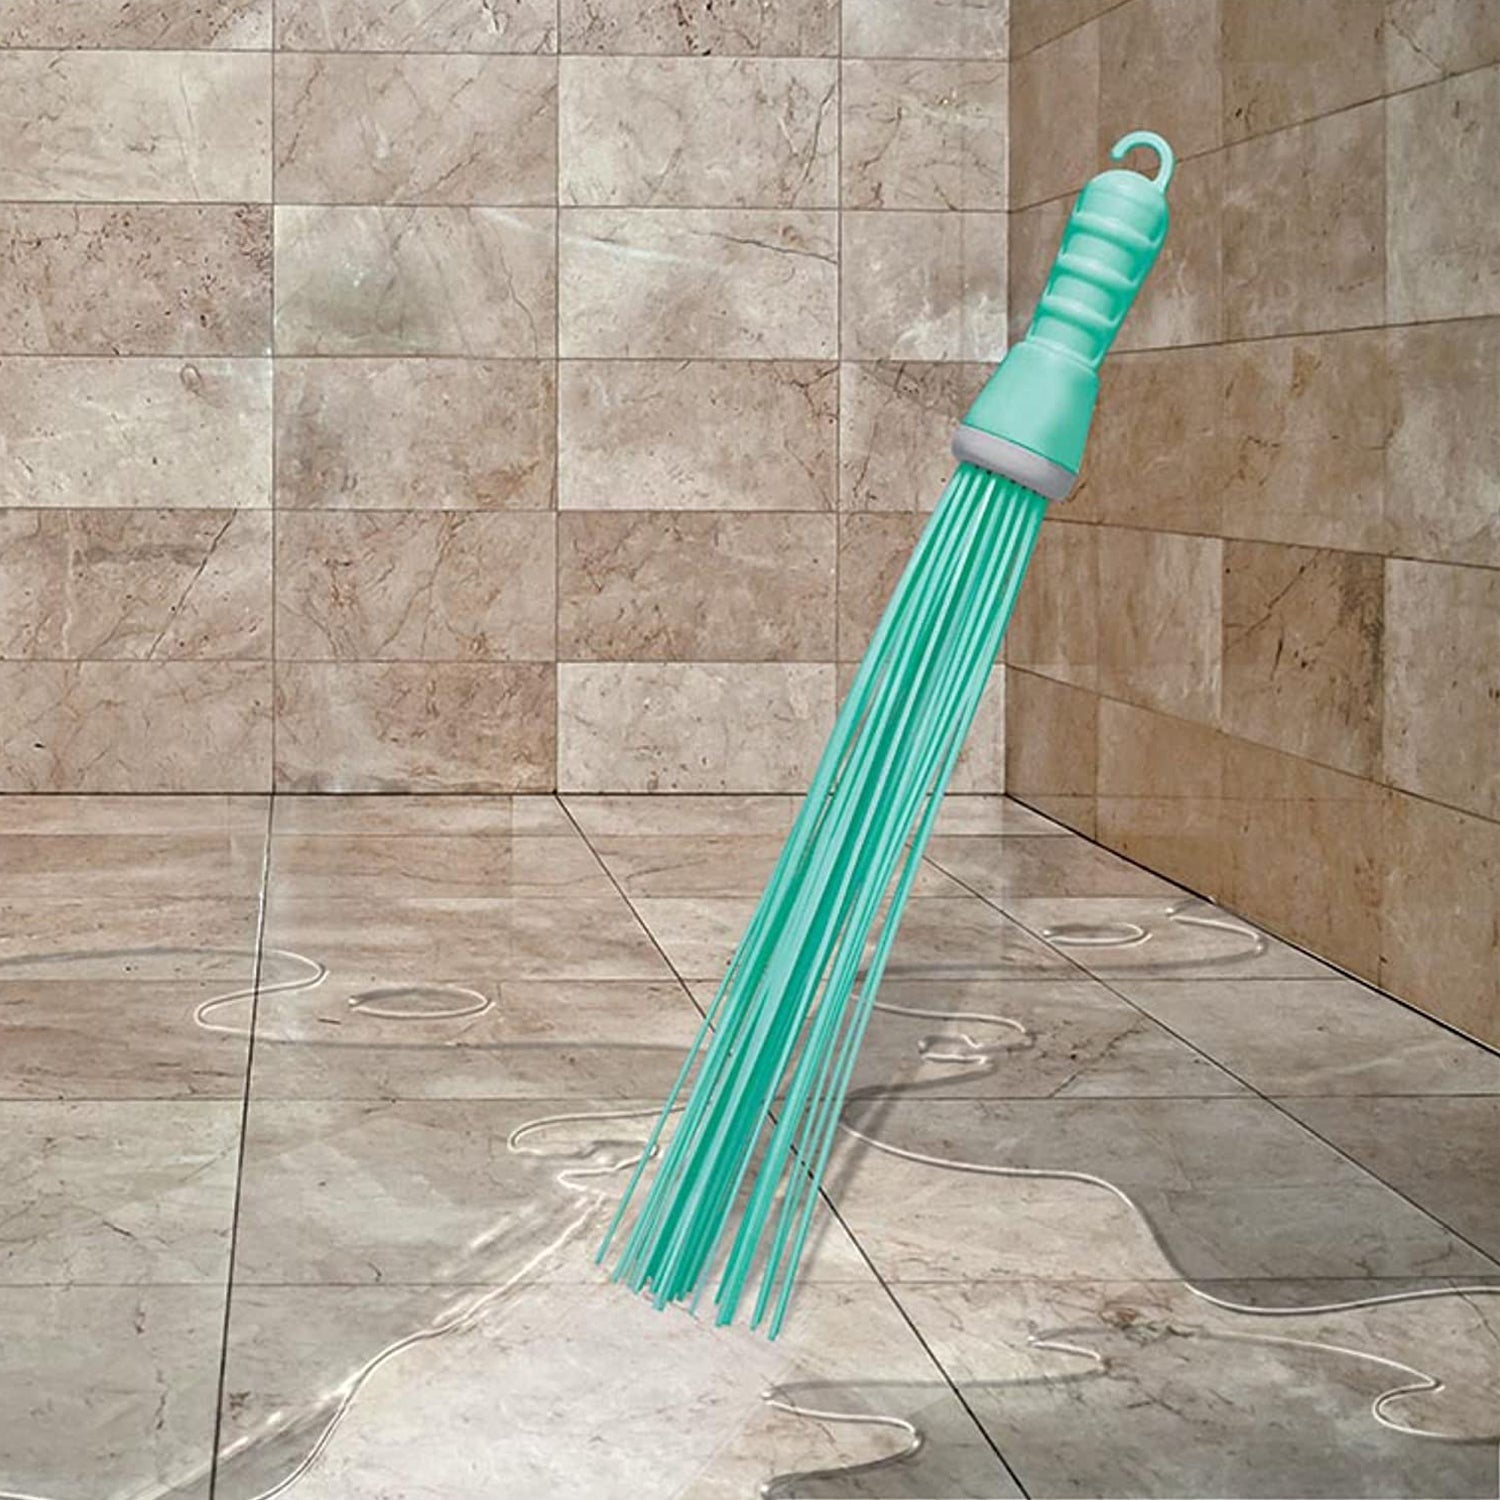 4024 Plastic Hard Bristle Broom for Bathroom Floor Cleaning and Scrubbing, Wet and Dry Floor Cleaning 